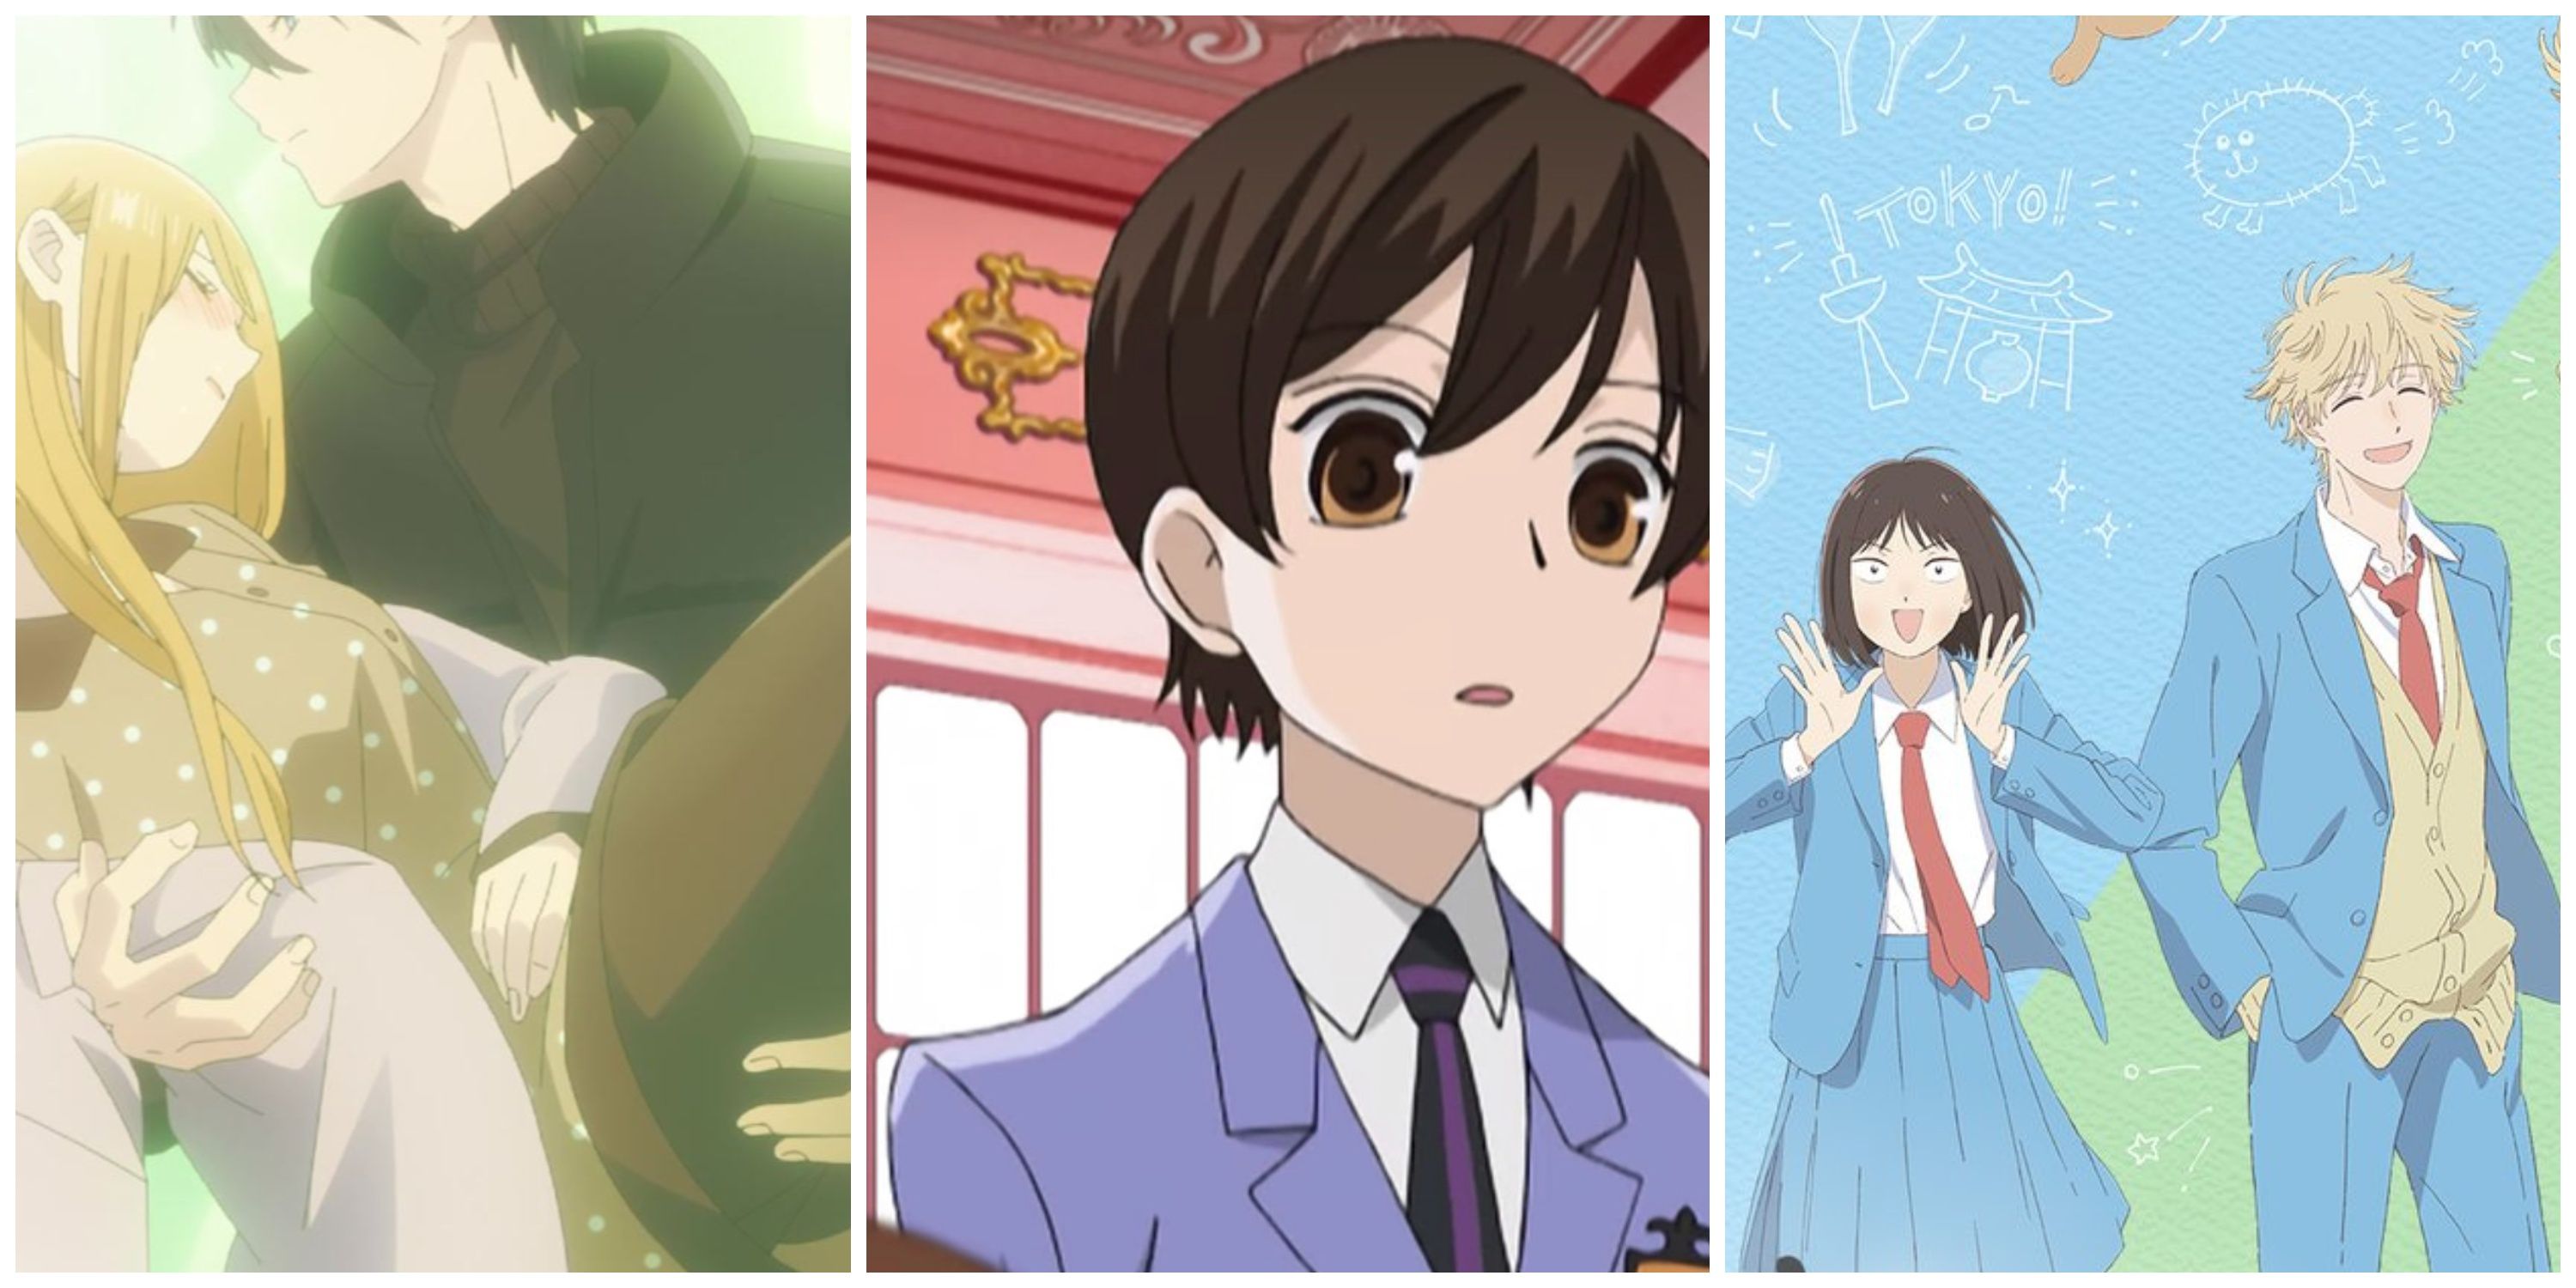 Yamada holding Akane in Loving Yamada kun at Lv999, Haruhi in Ouran High School Host Club, Mitsumi and Shima from Skip and Loafer.